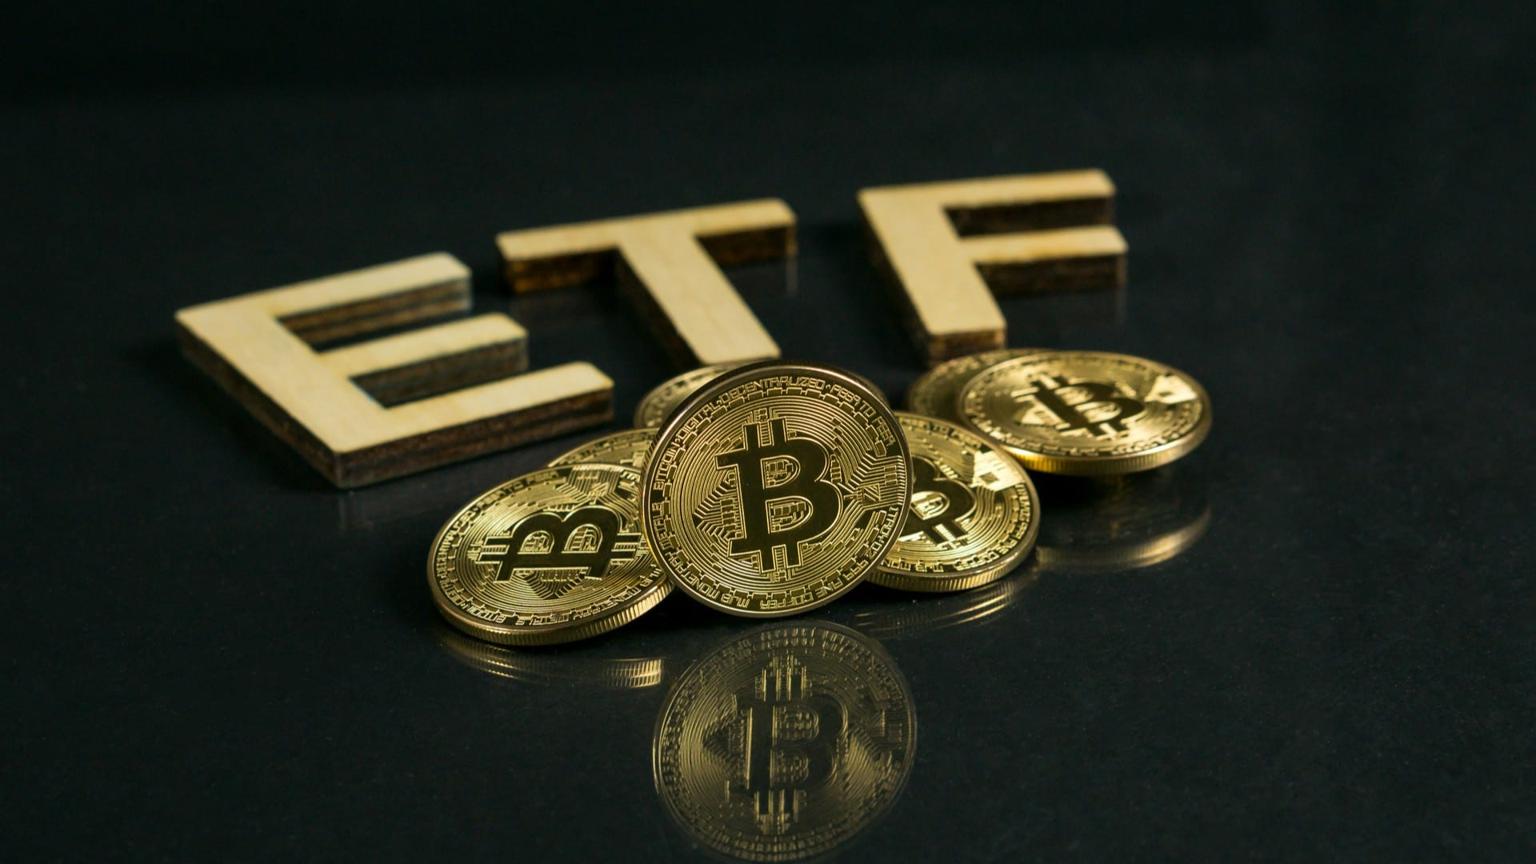 Valkyrie becomes the first spot bitcoin etf to diversify custody of its coins